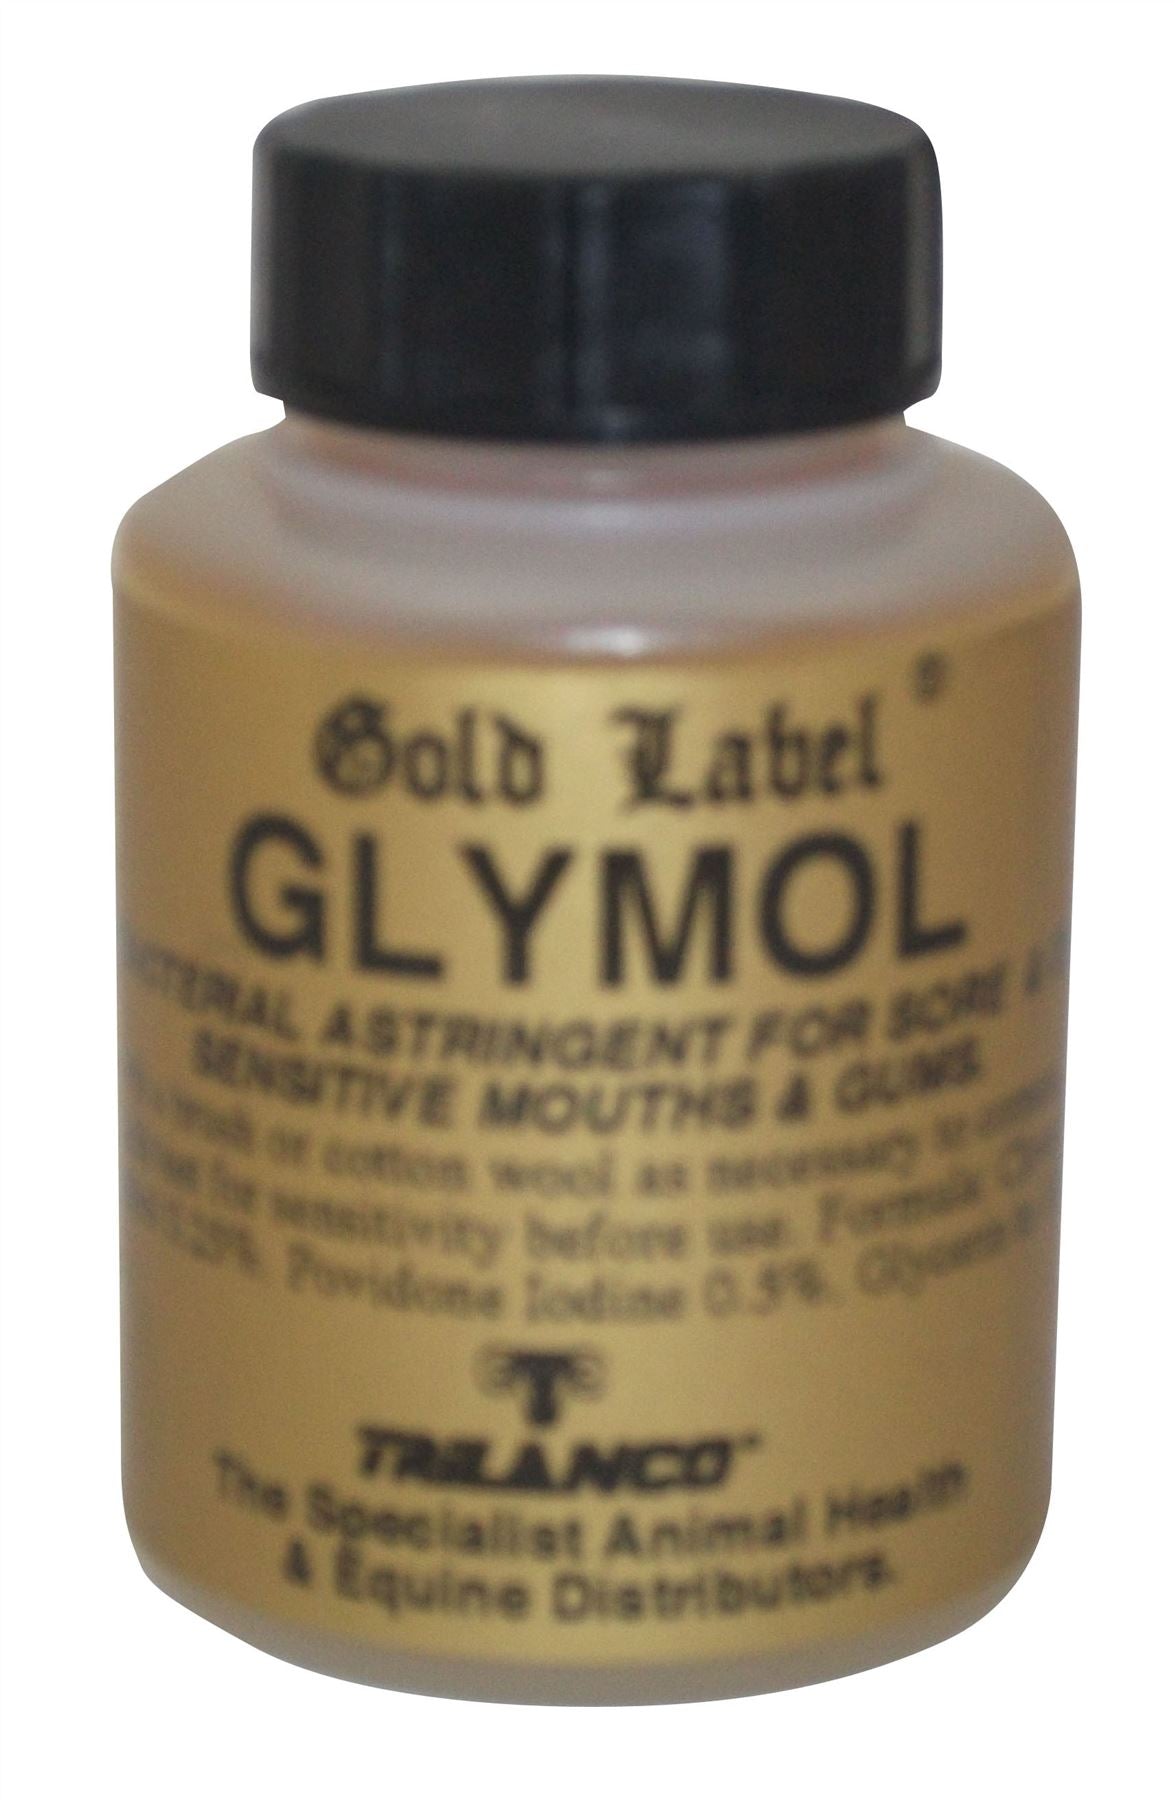 Gold Label Glymol Mouth Paint - Just Horse Riders